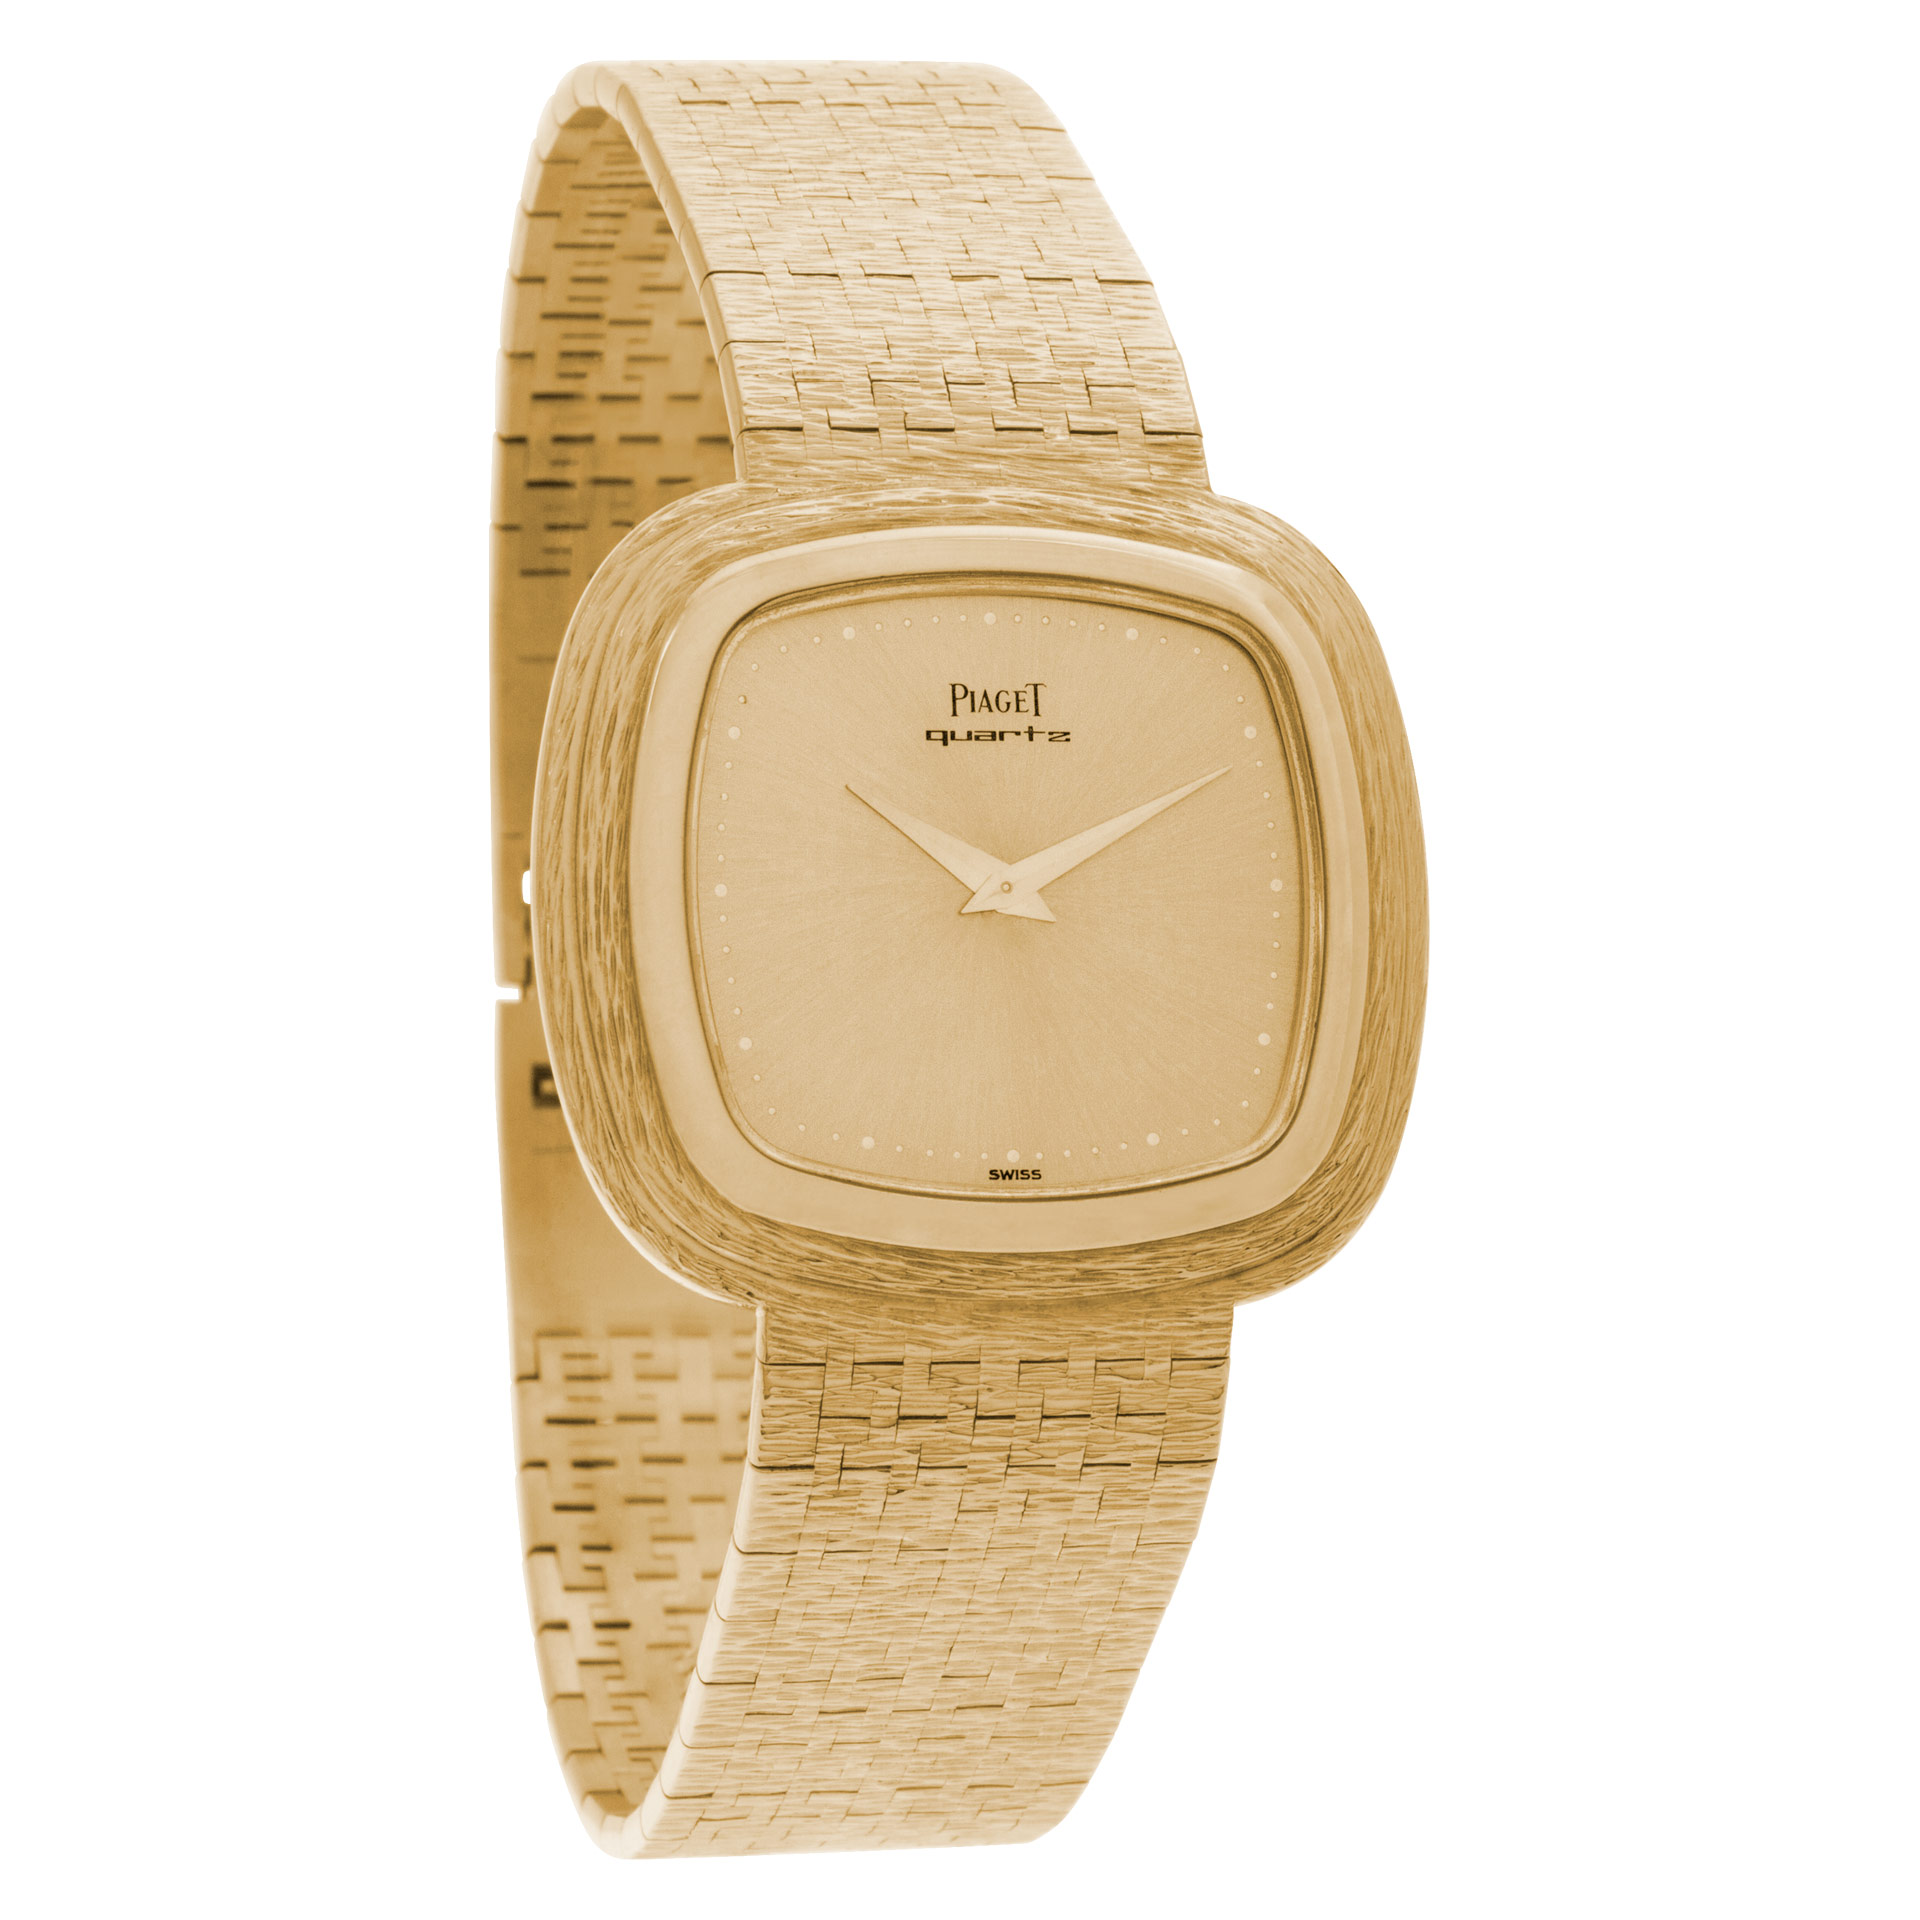 Piaget Classic 34mm 75121a6 image 3